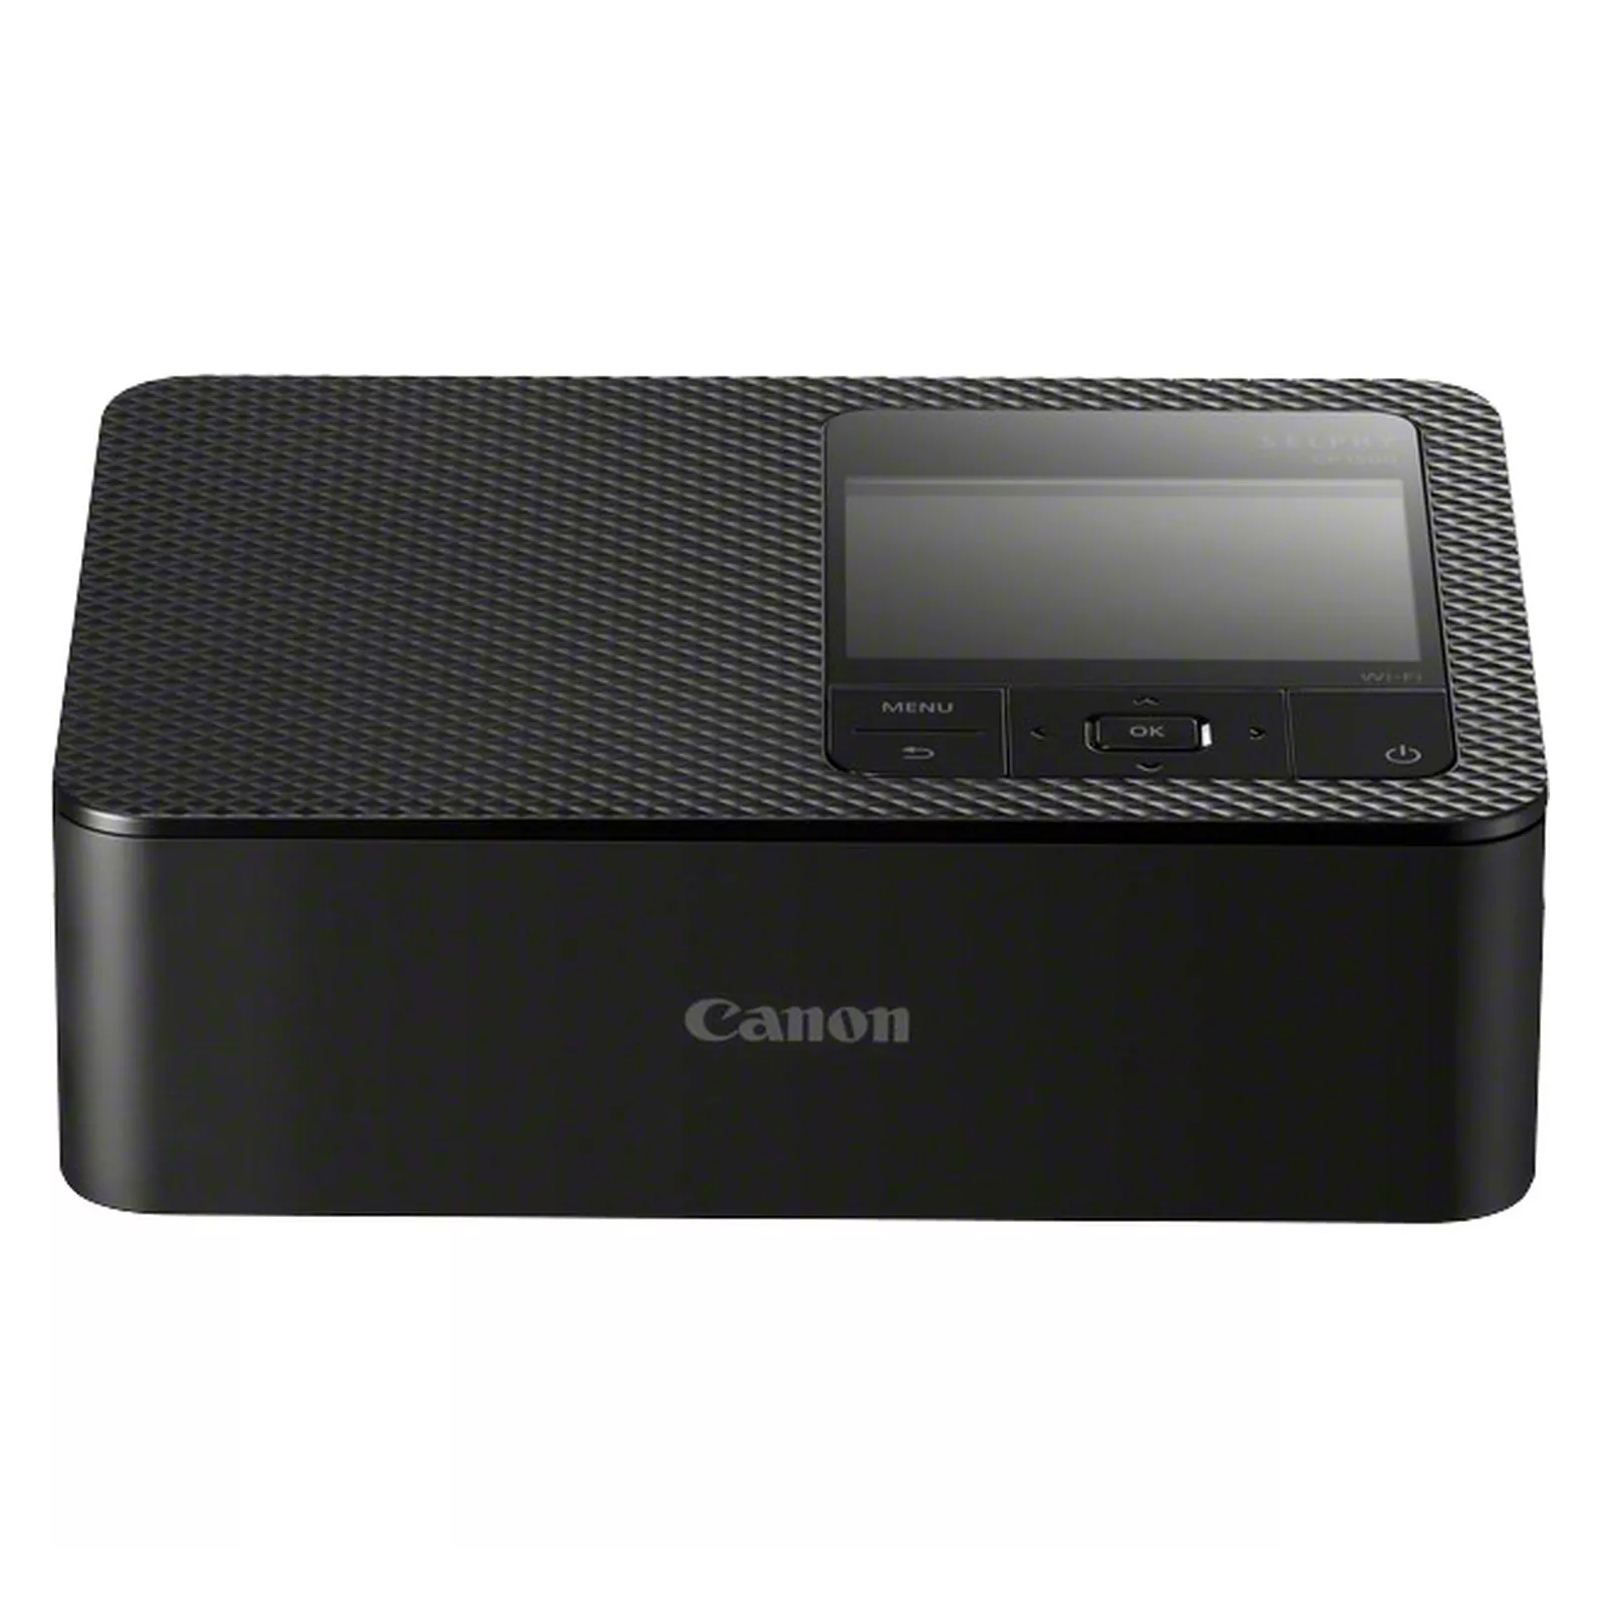 Image of Canon Selphy CP1500 Wireless Photo Printer - Black